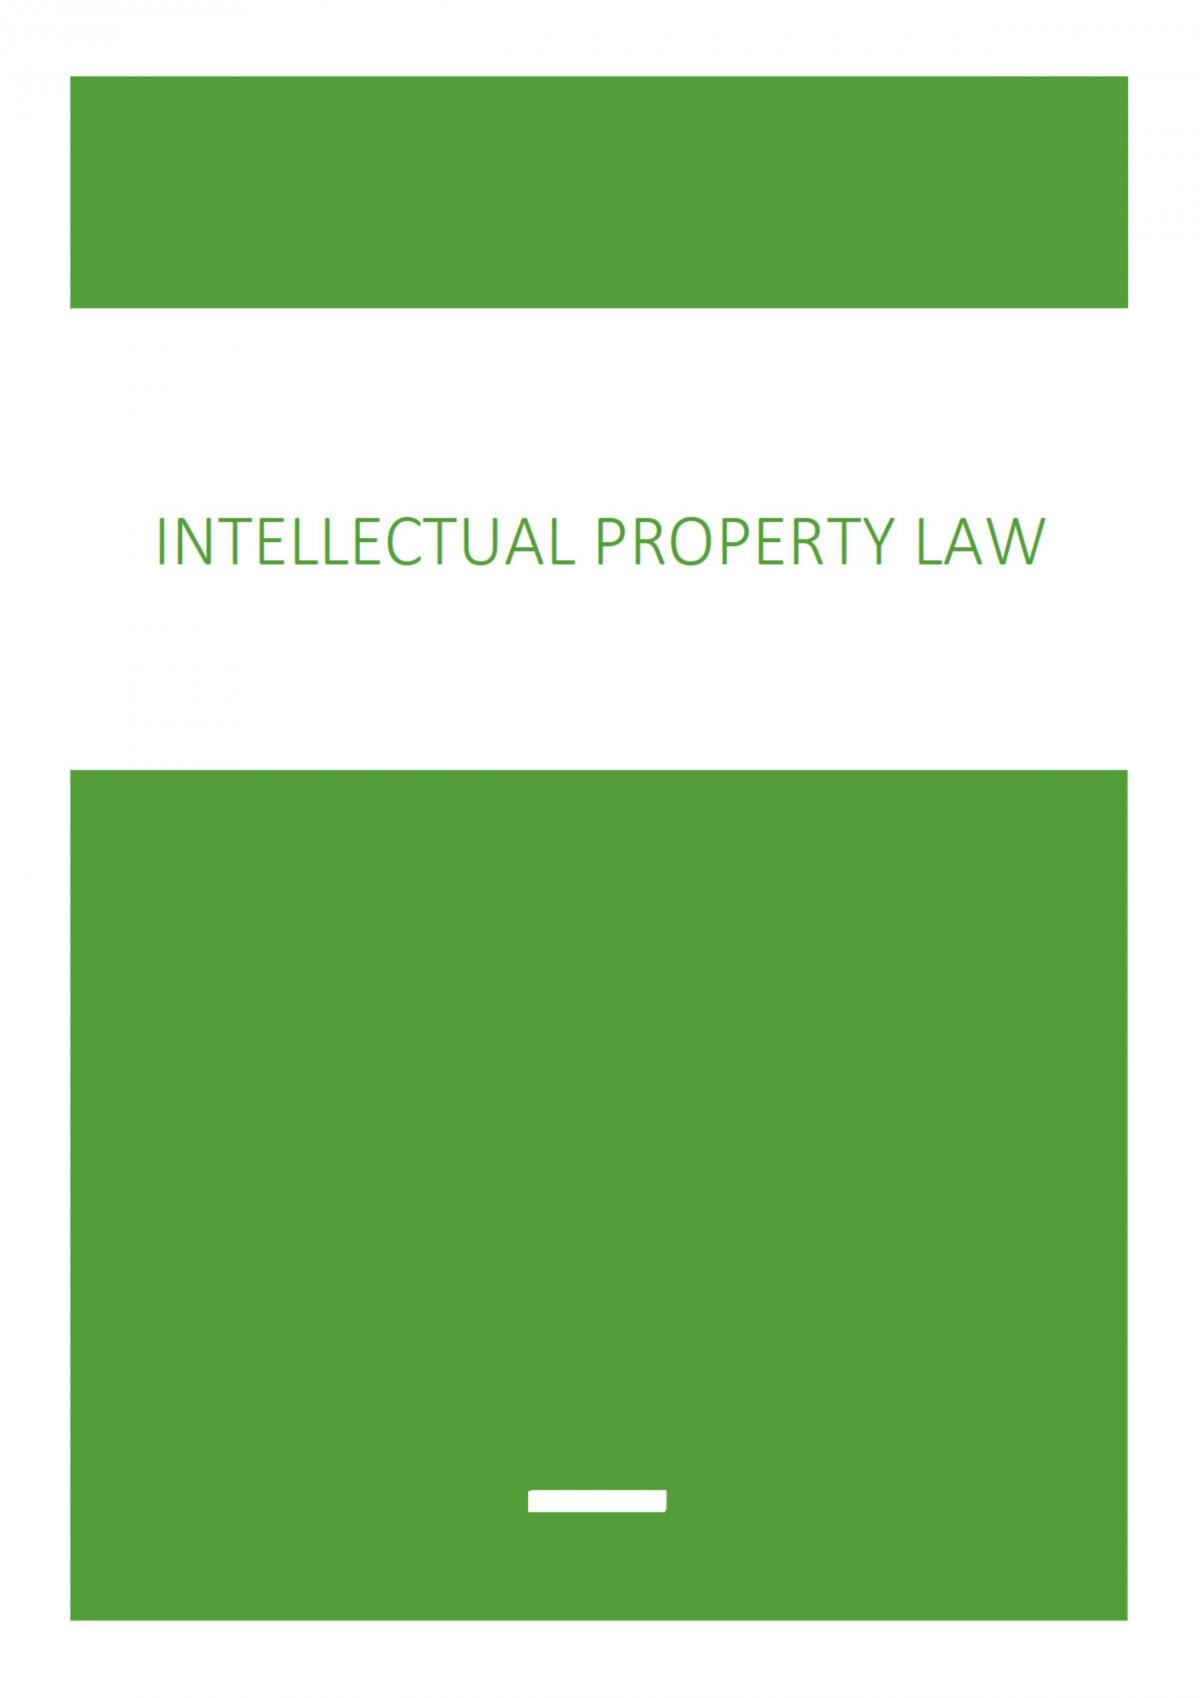 Intellectual Property Law I: Copyright, Designs and Enforcement of IP Rights  - Page 1